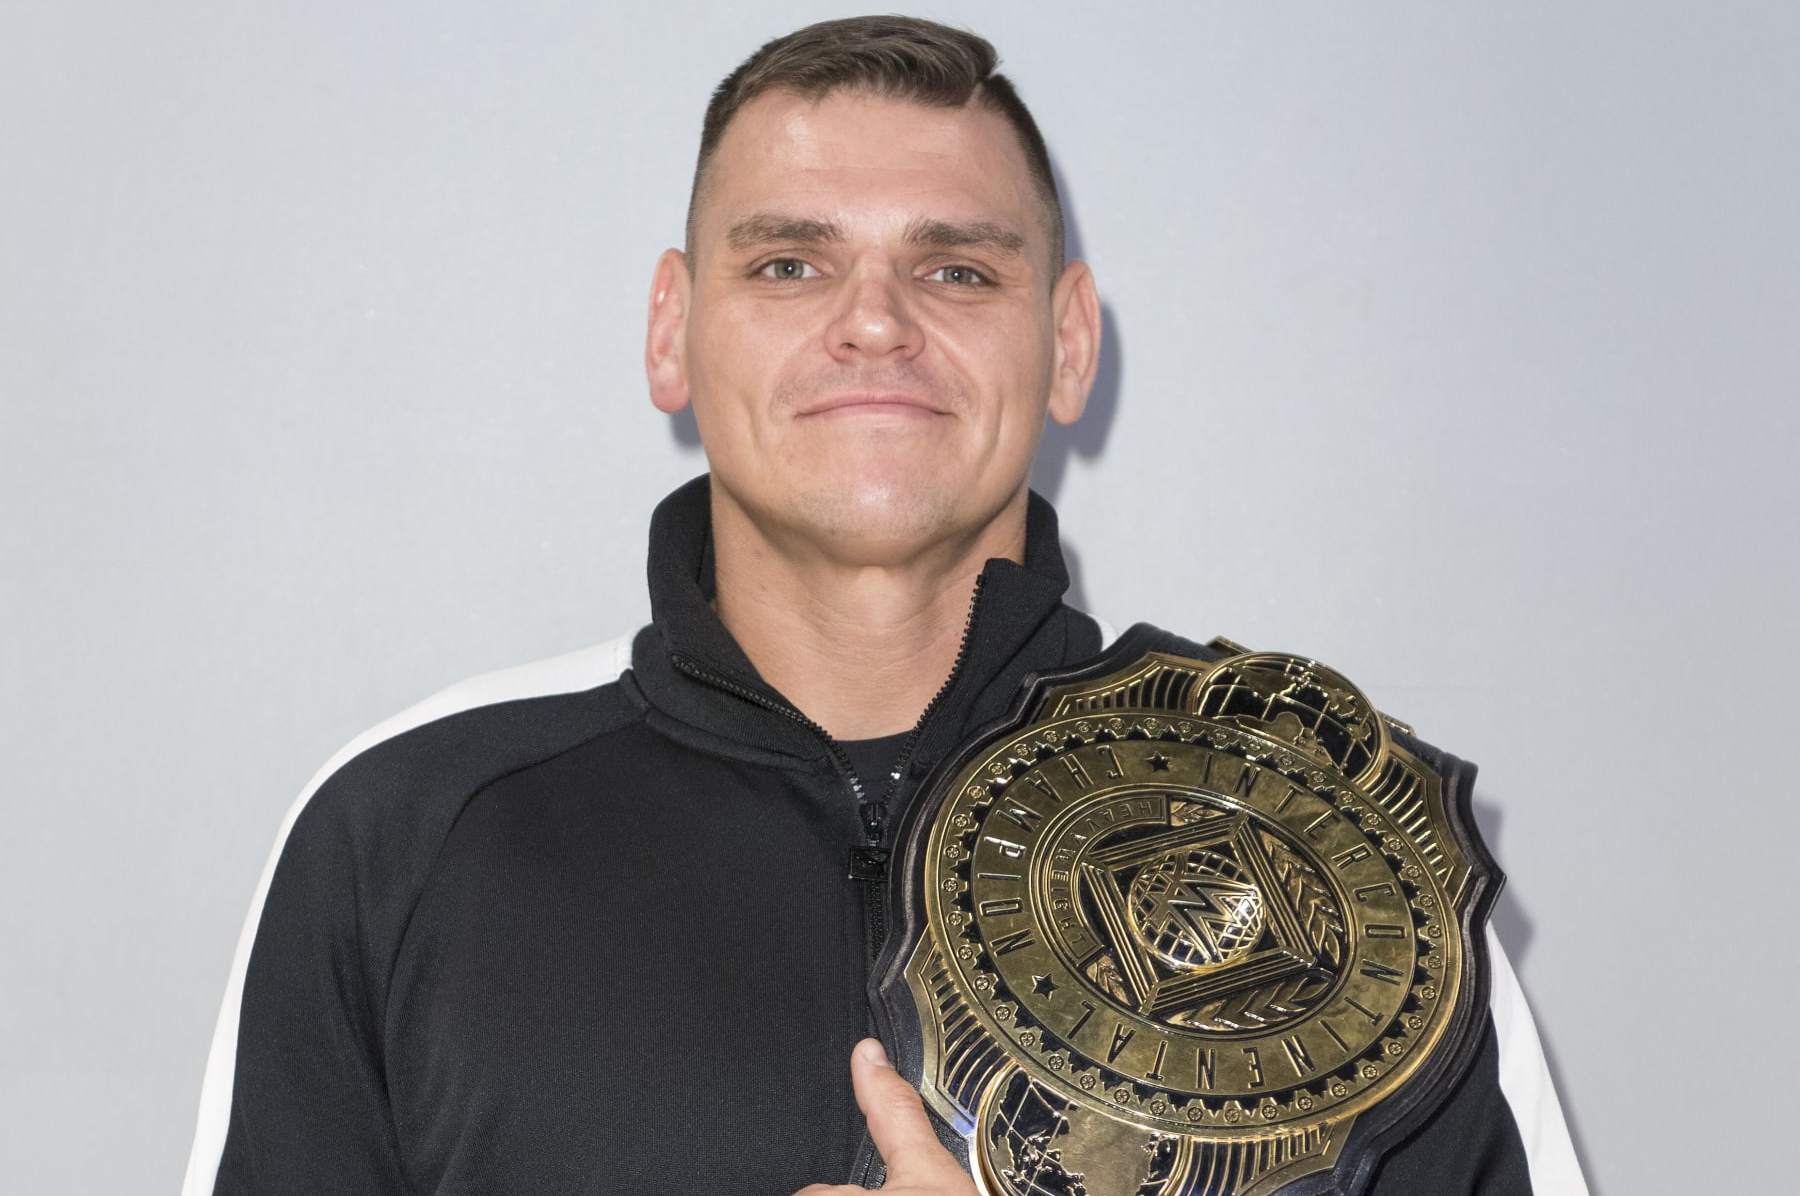 15-facts-about-intercontinental-champion